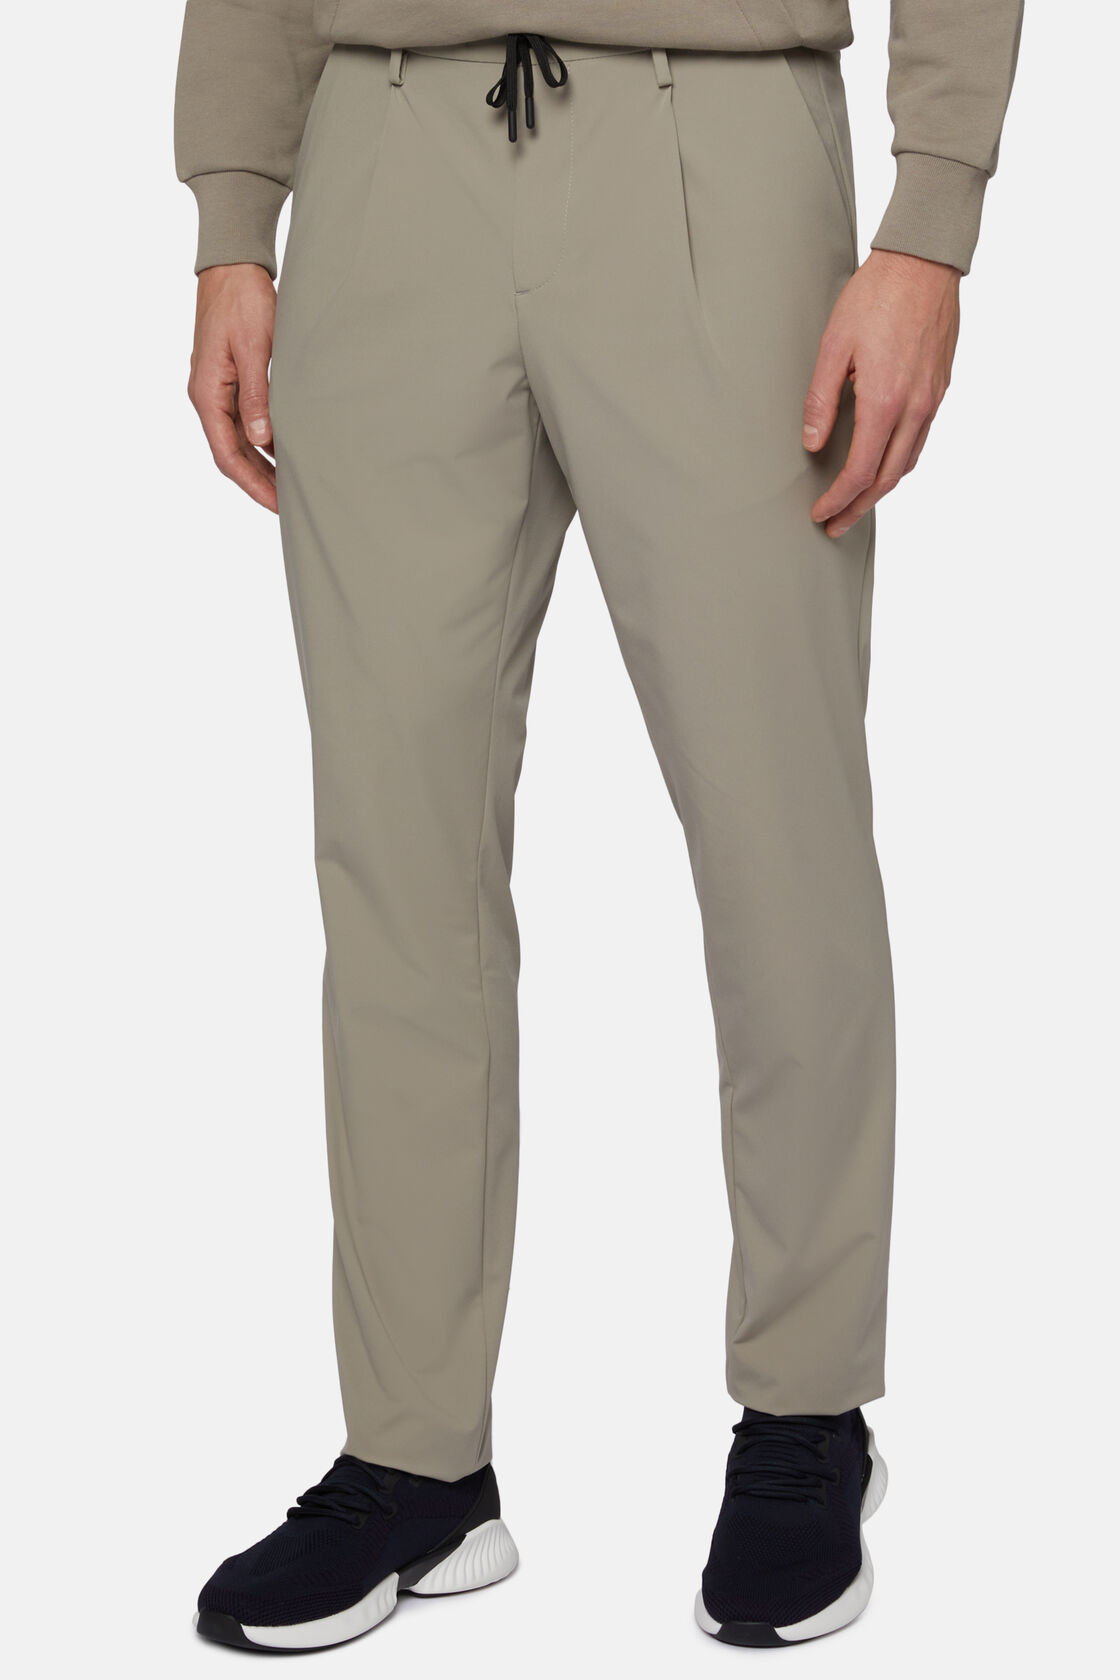 B-Tech Stretch Nylon Trousers, Taupe, hi-res